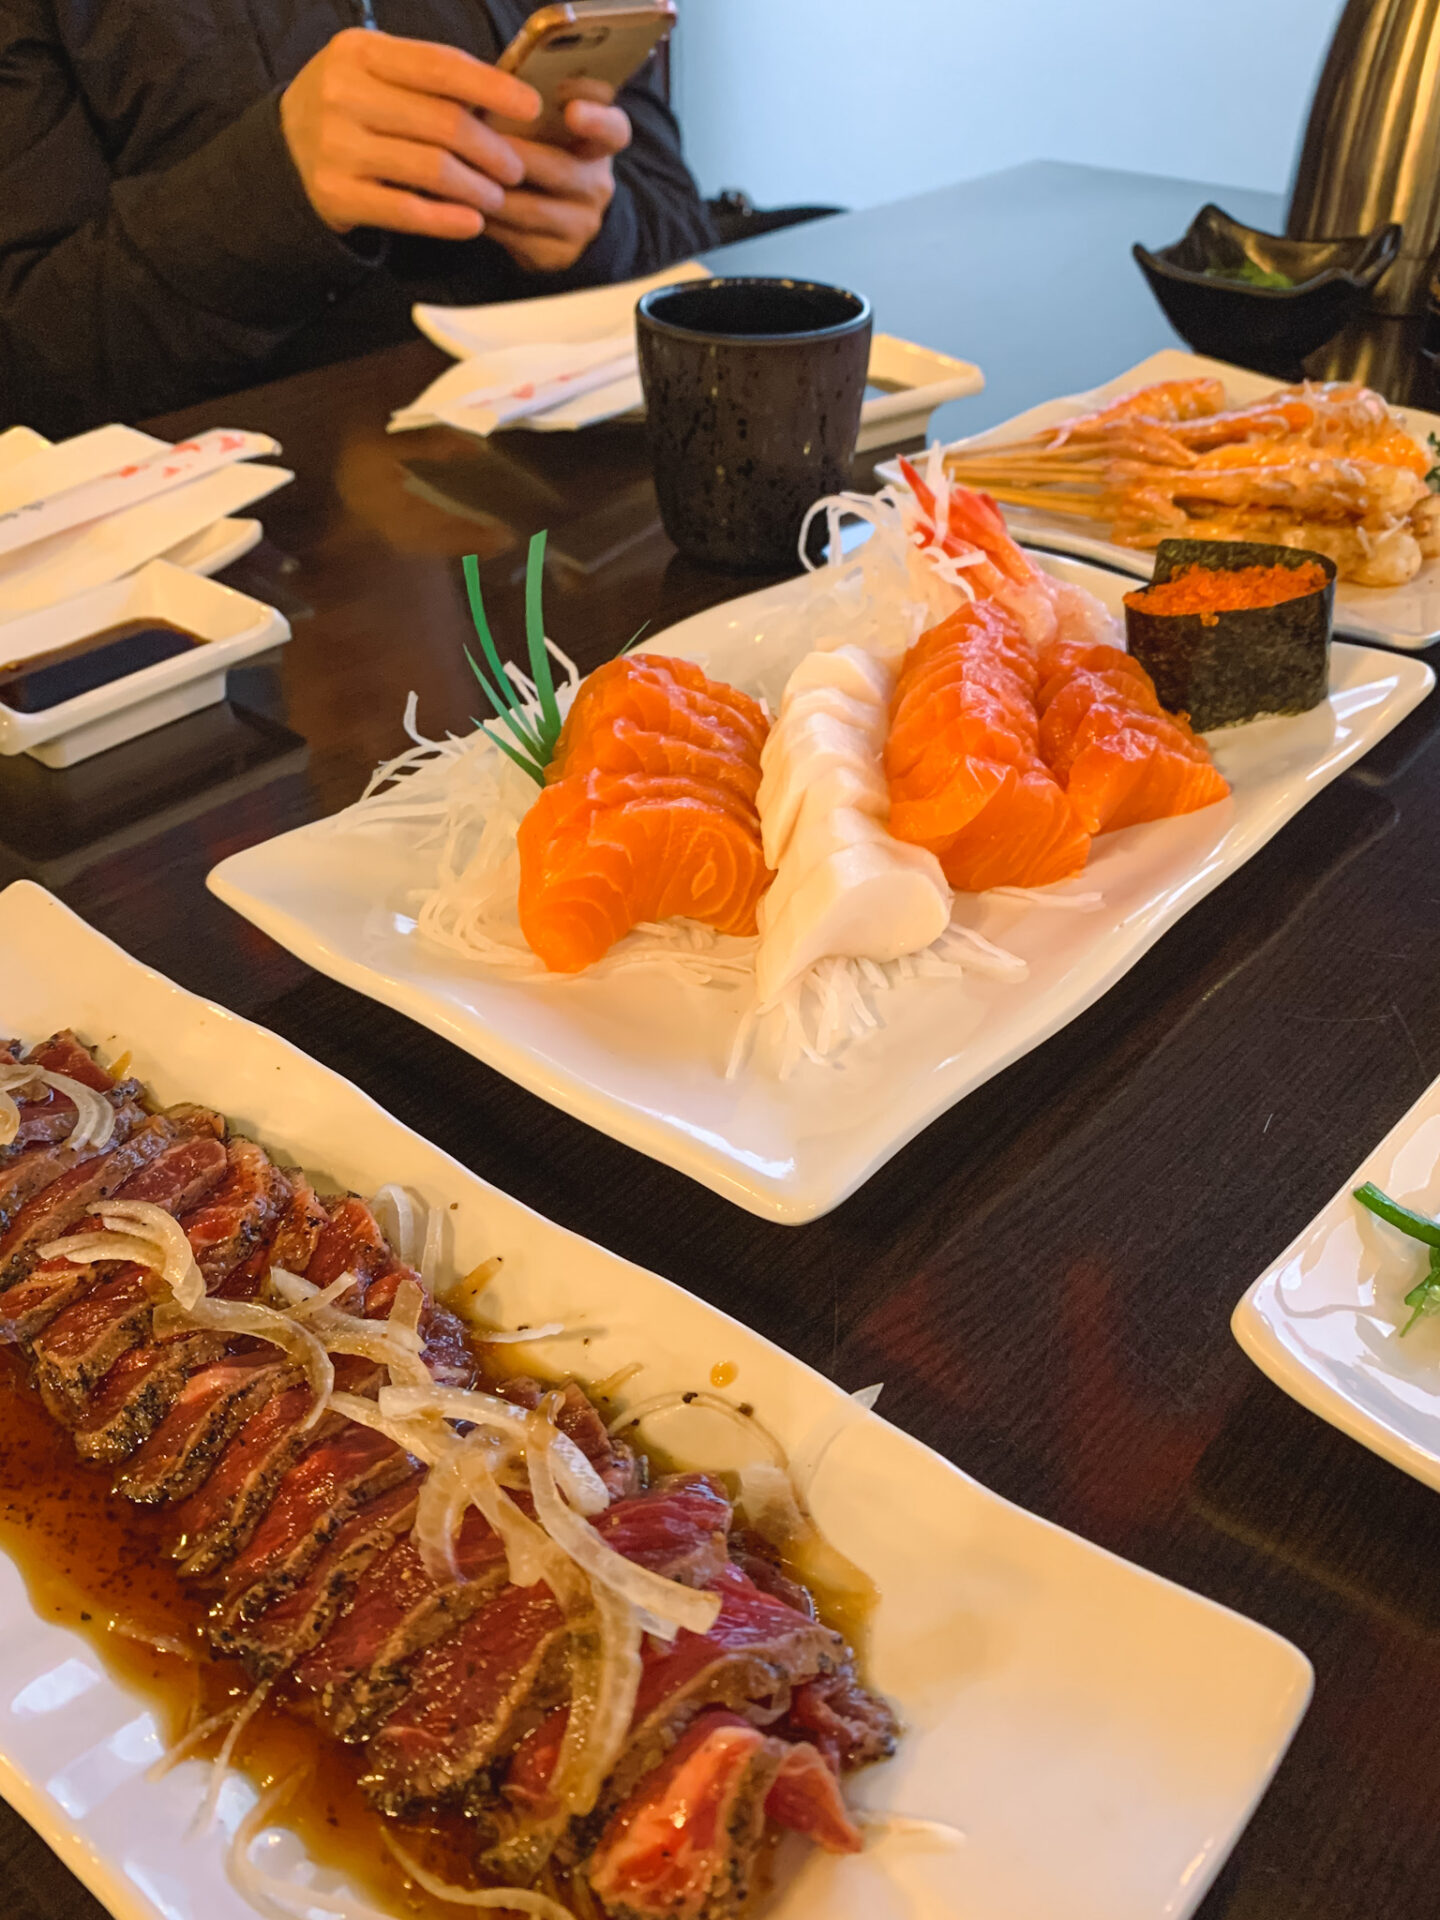 All-you-can-eat-sushi from Aji Sai Japanese Restaurant in Thornhill, Ontario